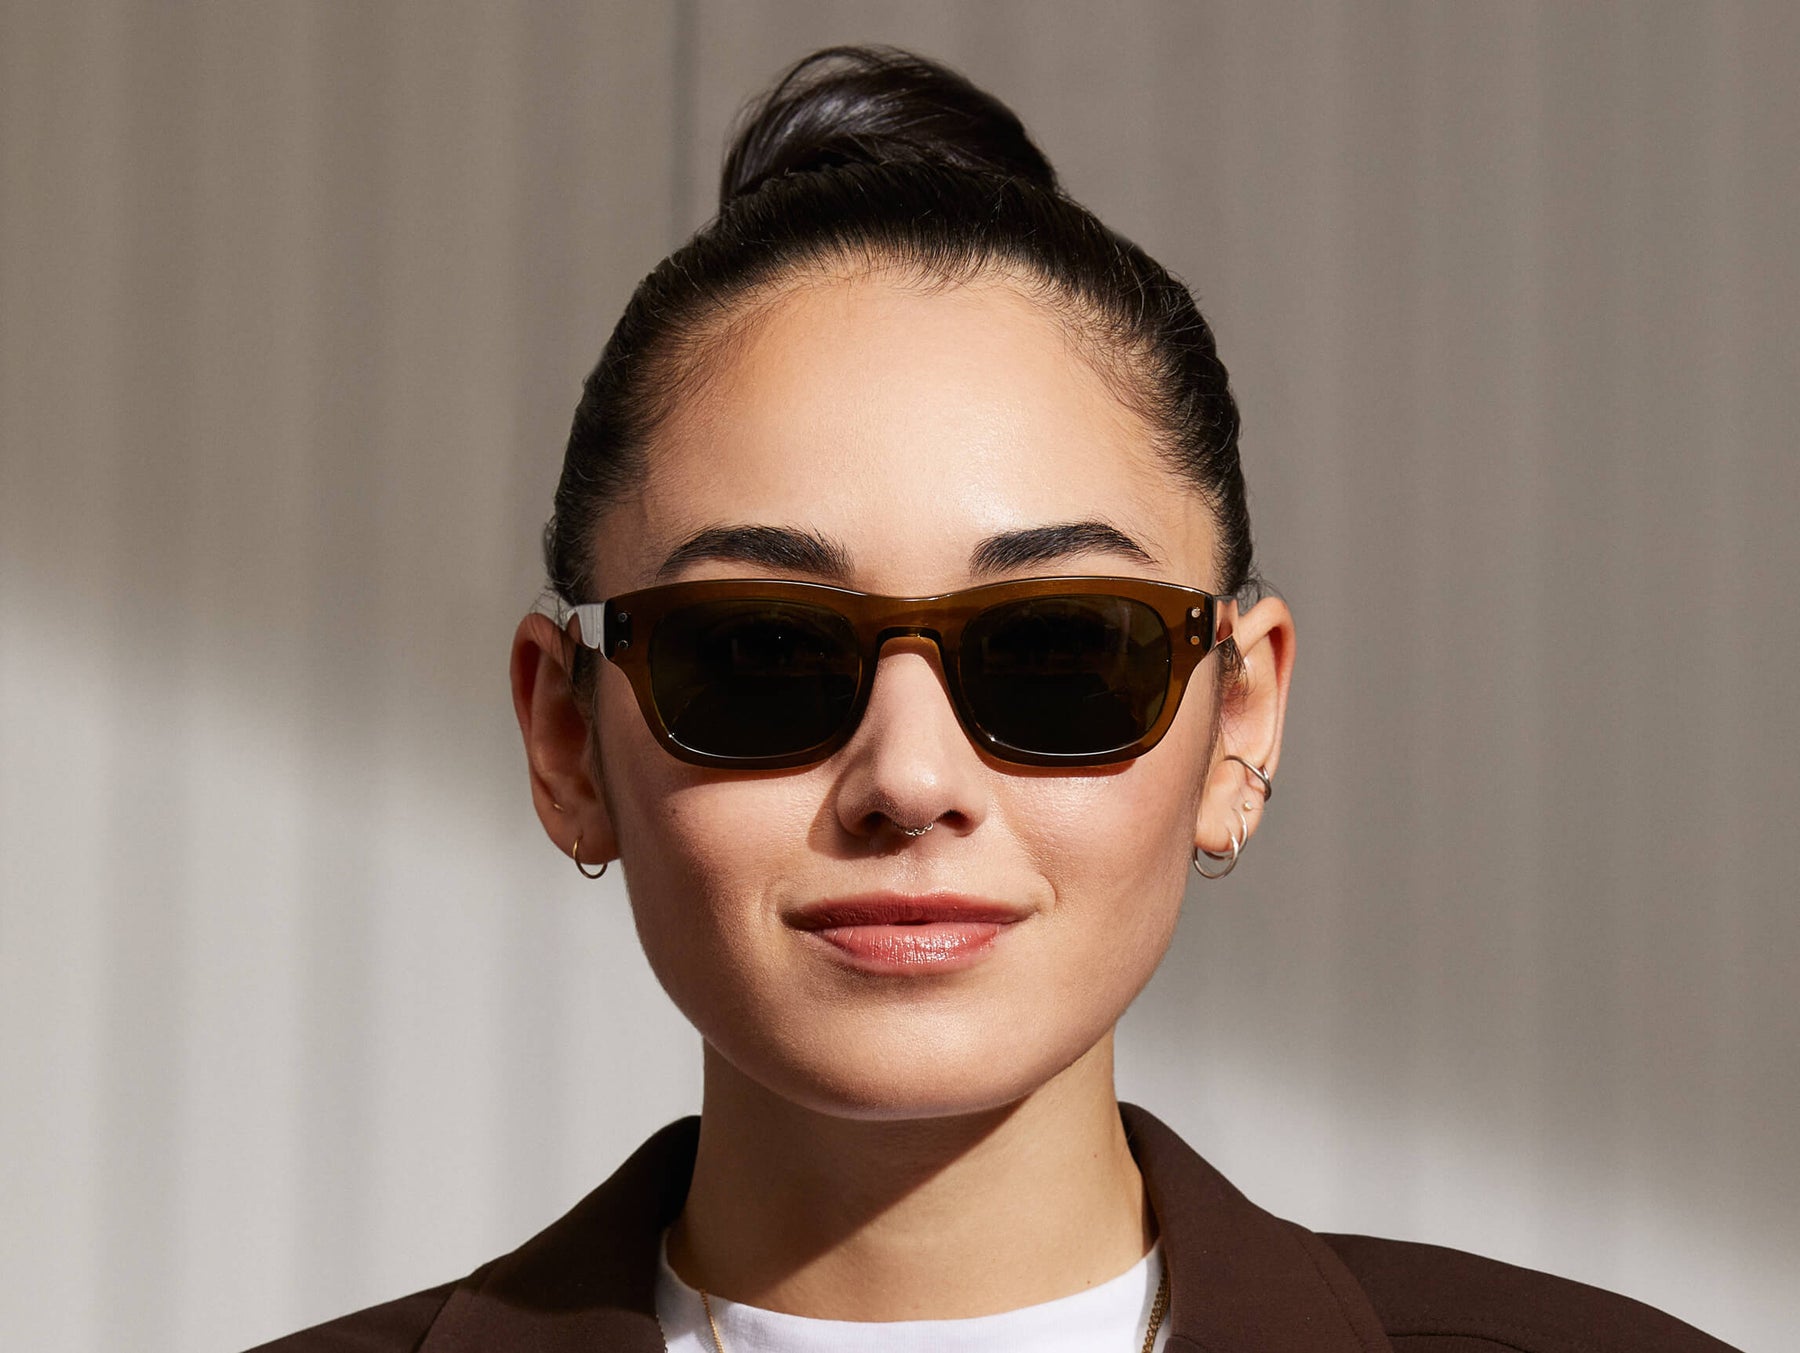 Model is wearing The NEBB SUN in Olive Green in size 48 with G-15 Glass Lenses